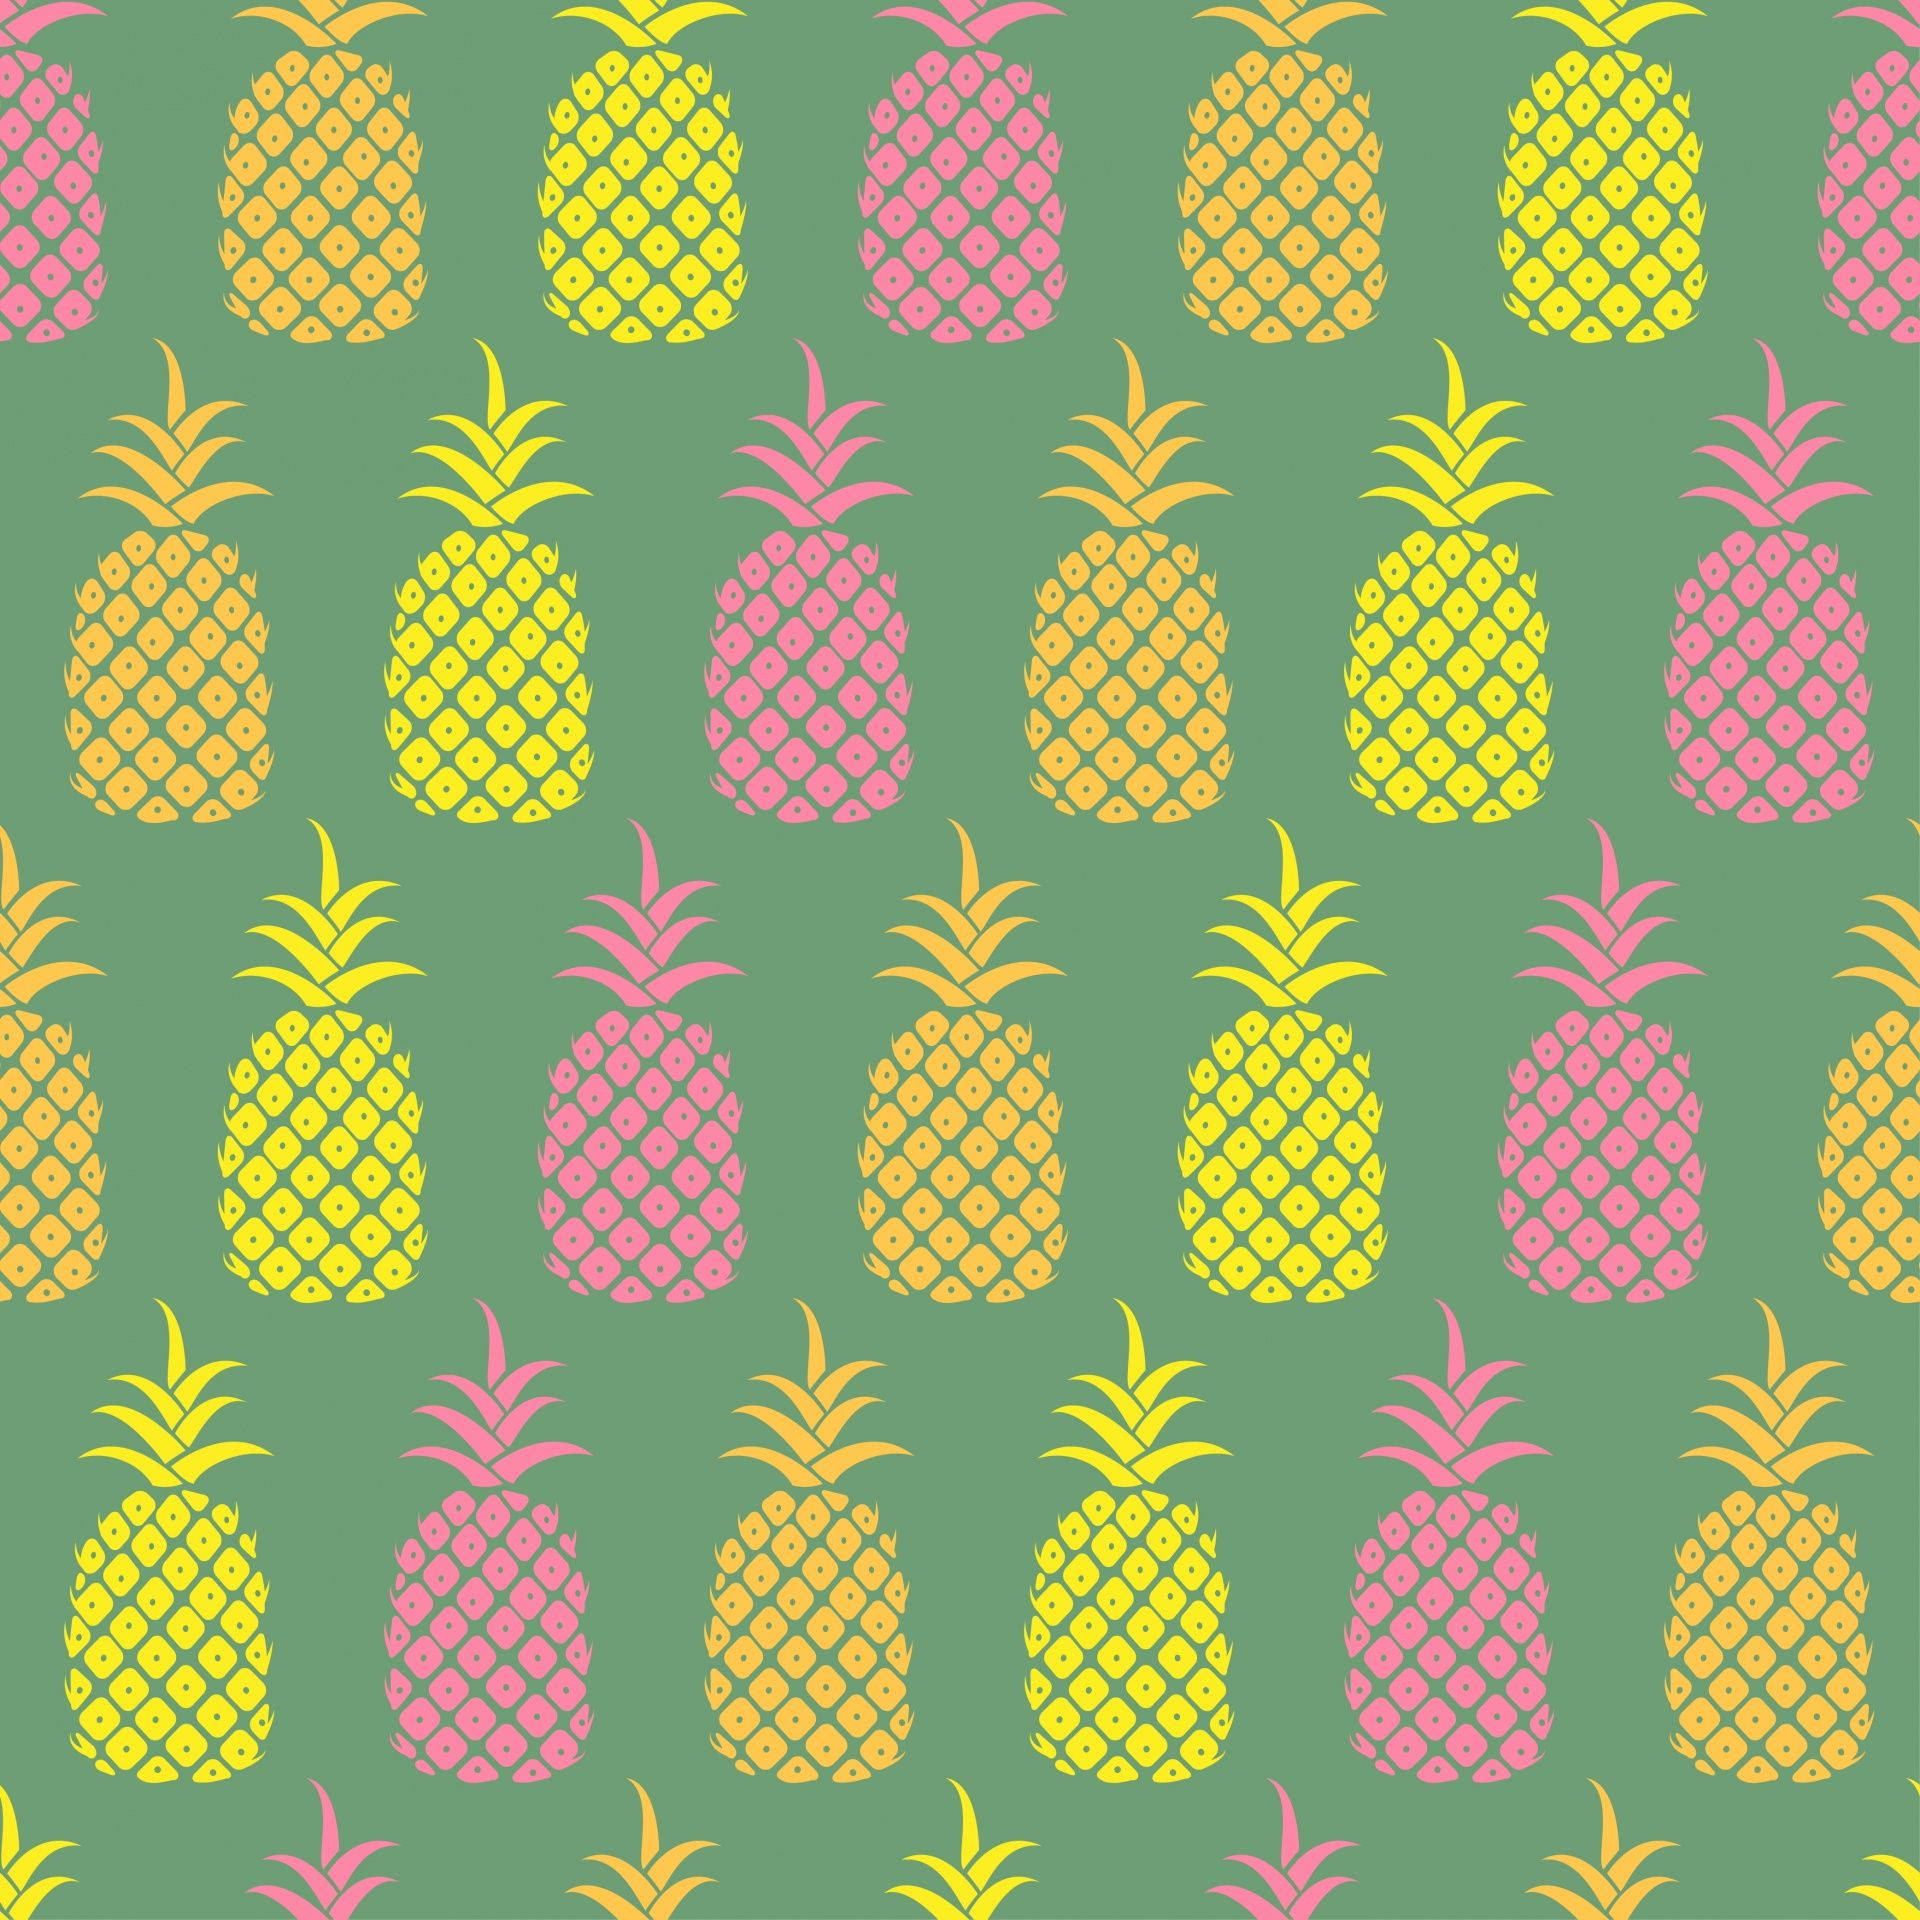 1920X1920 Pineapple Wallpaper and Background